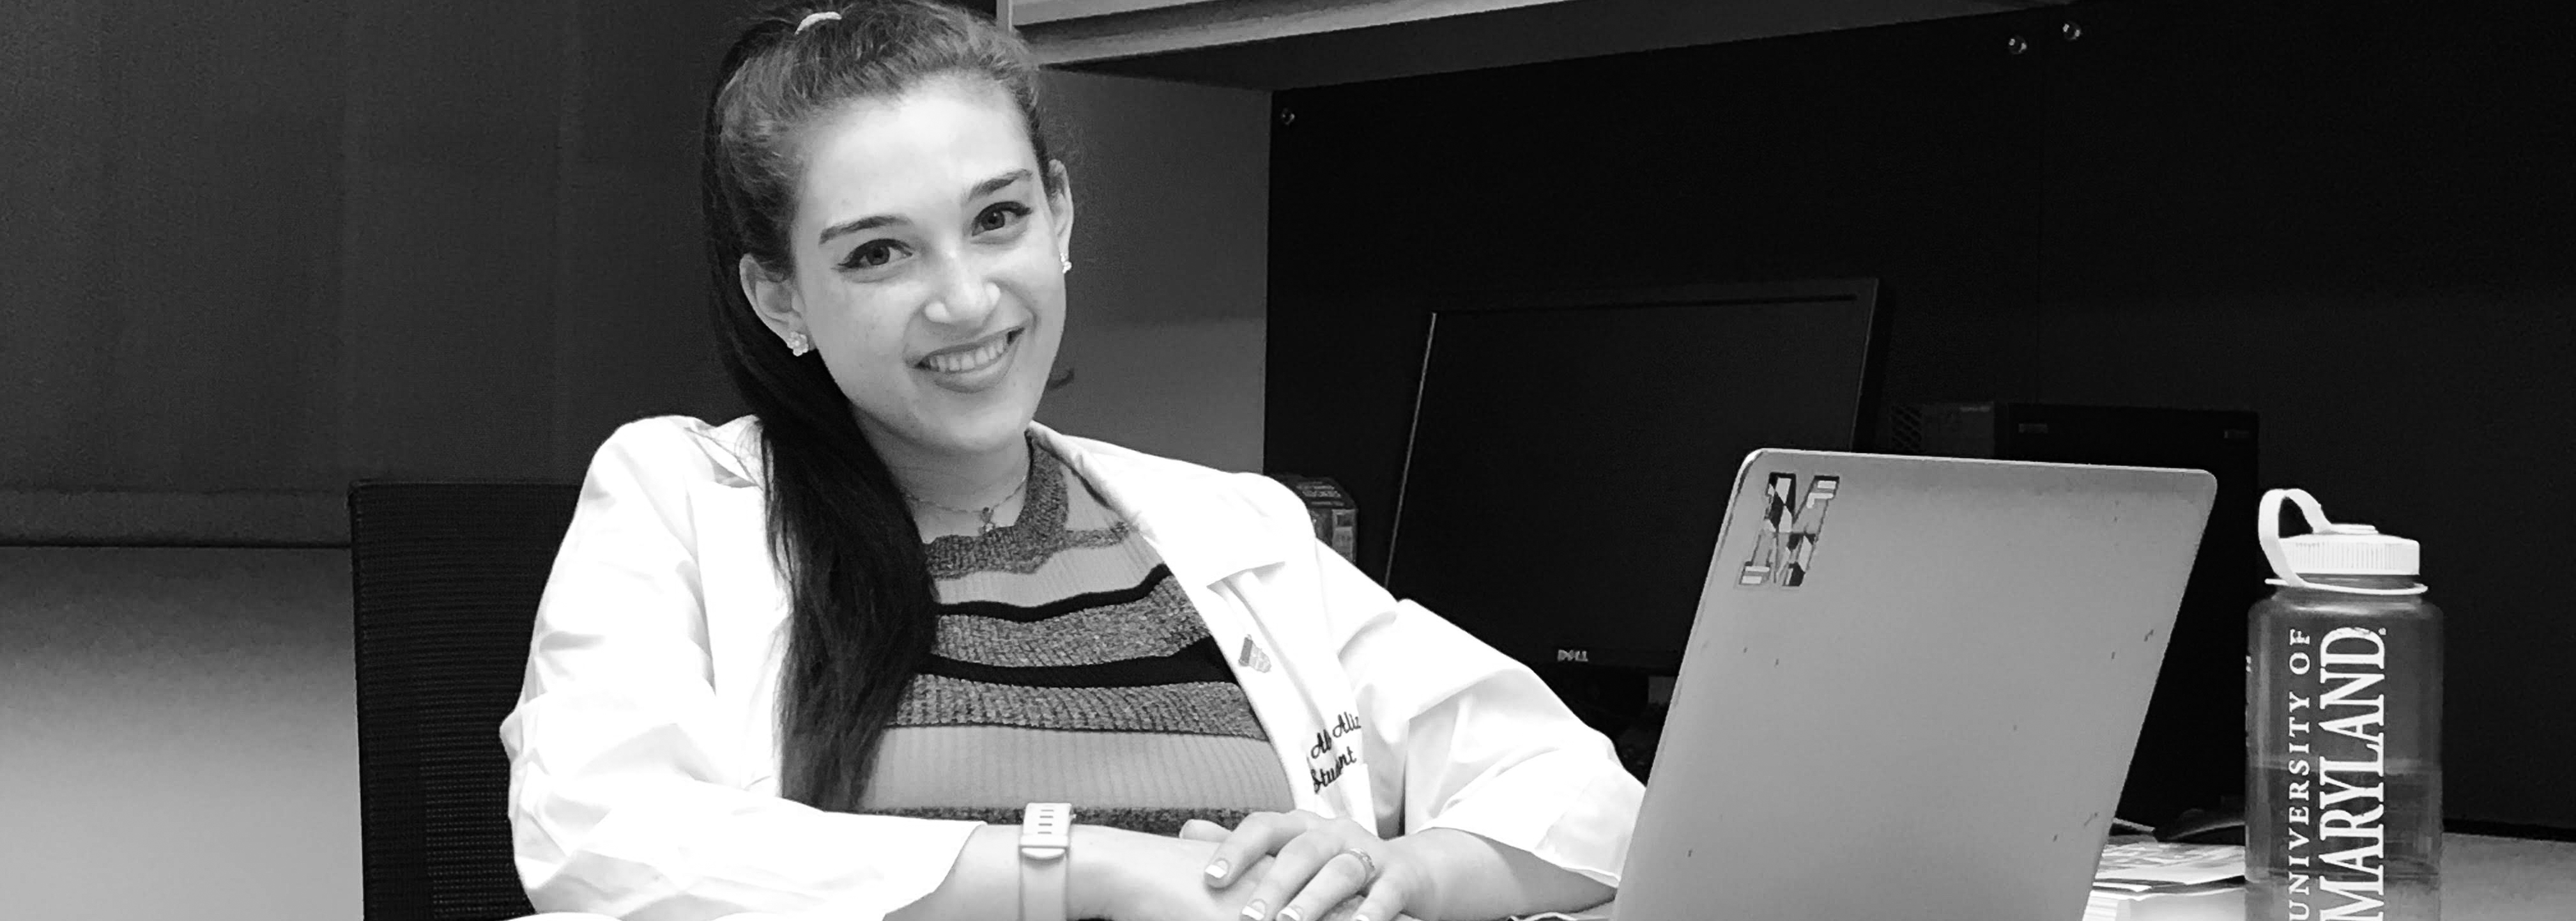 MSTP student Maddy Alizadeh
